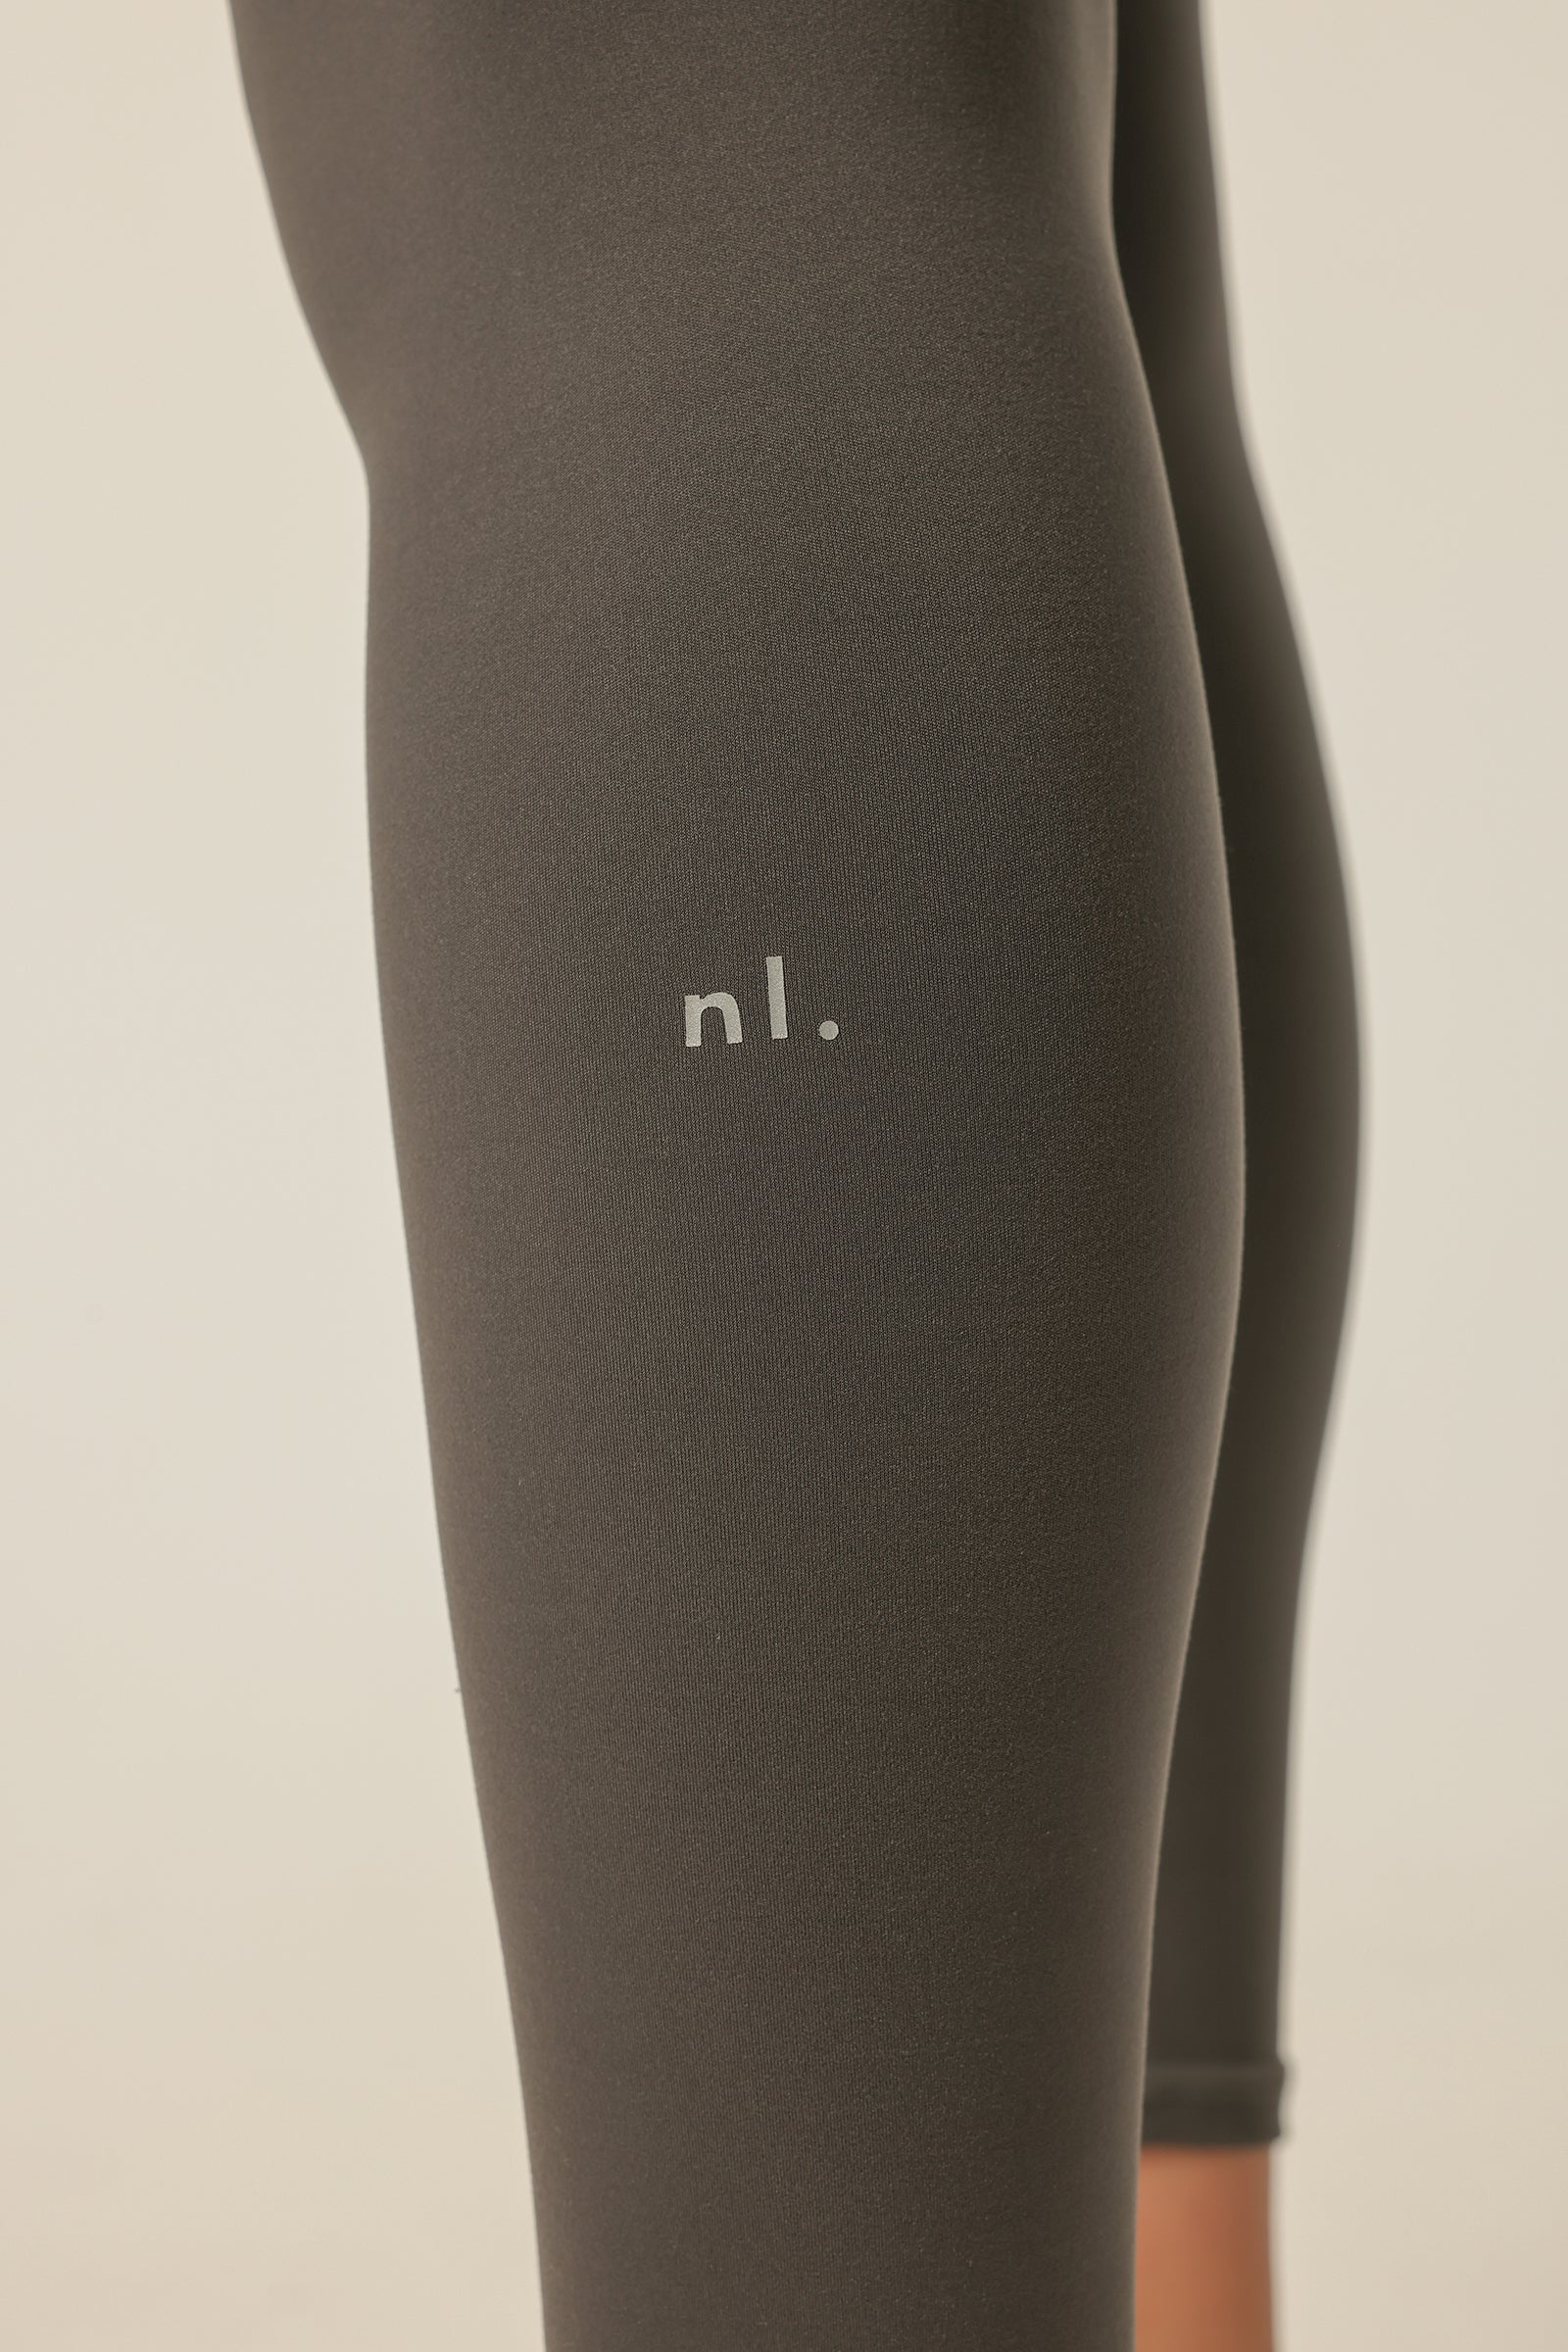 Nude Lucy Nude Active Tights In A Dark Grey In A Brown Coal Colour 